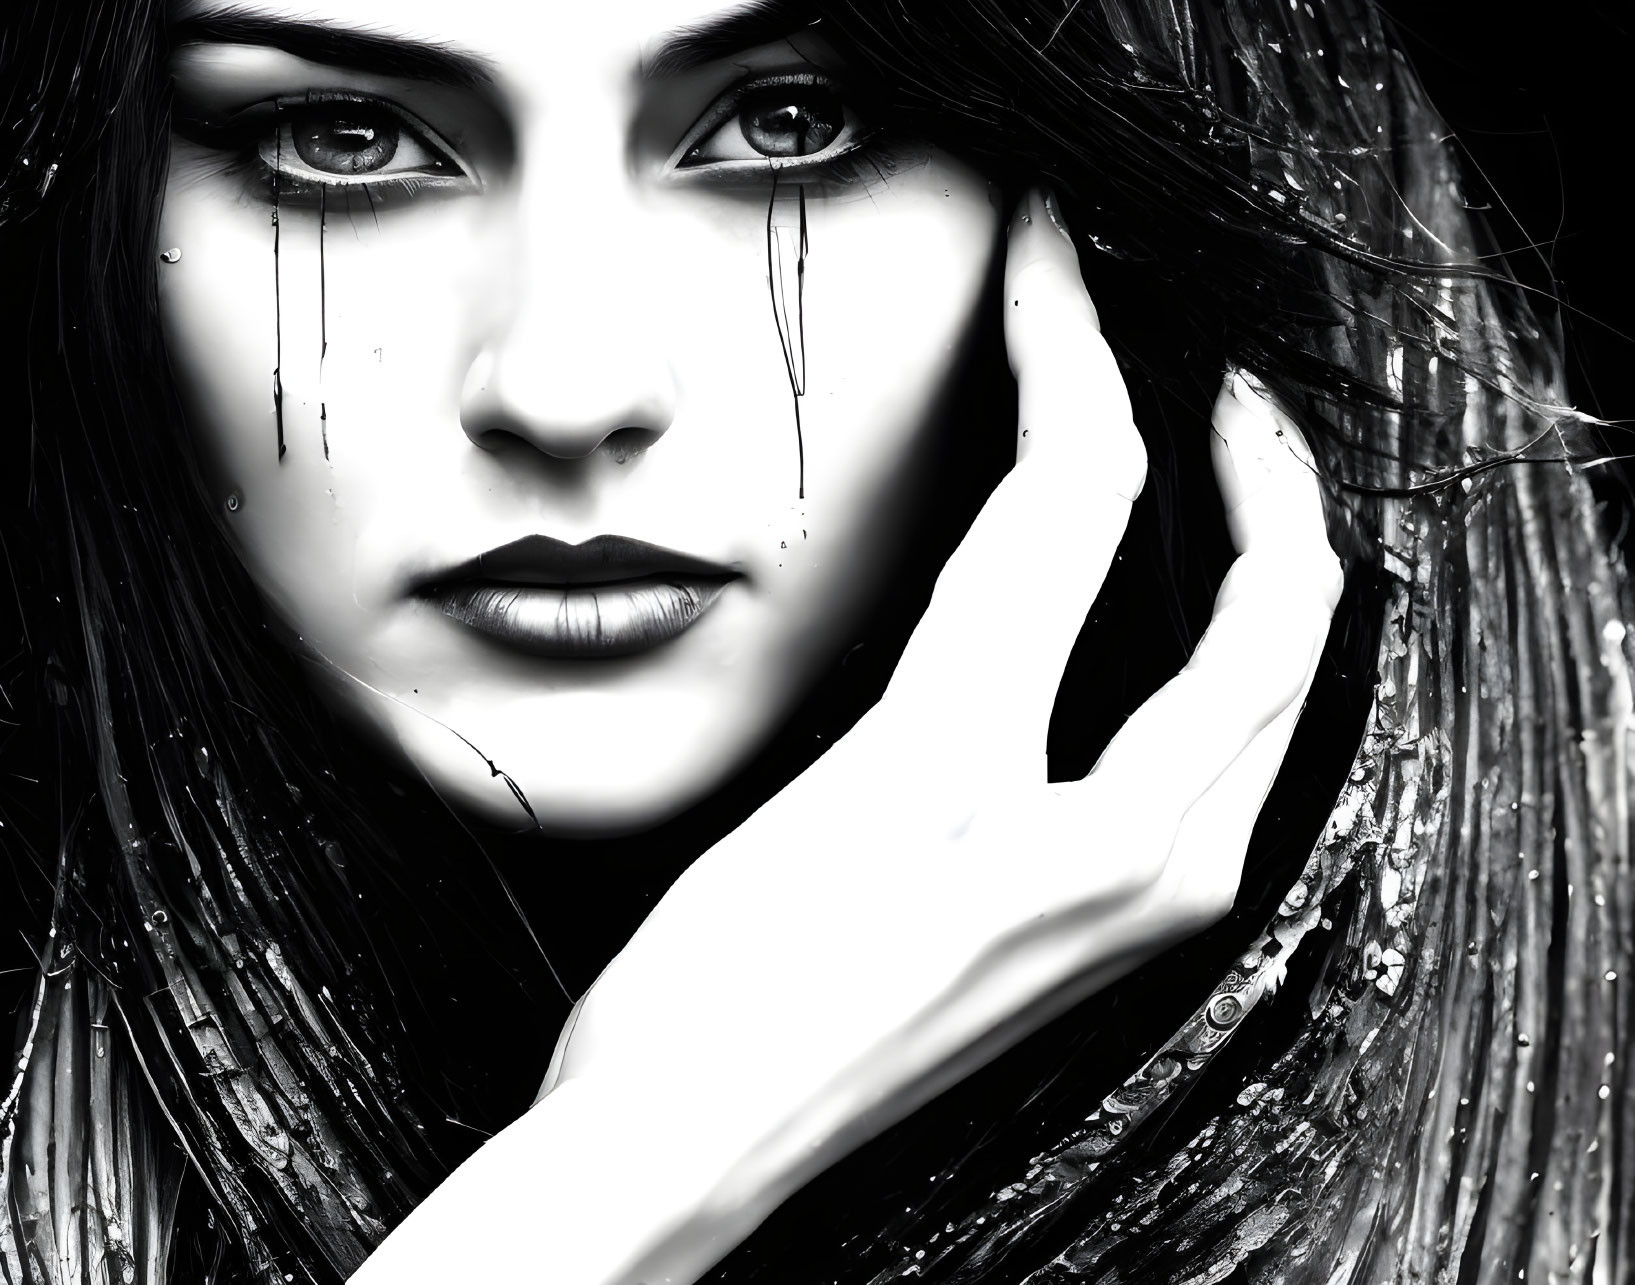 Monochrome digital art of woman with captivating eyes and dark hair